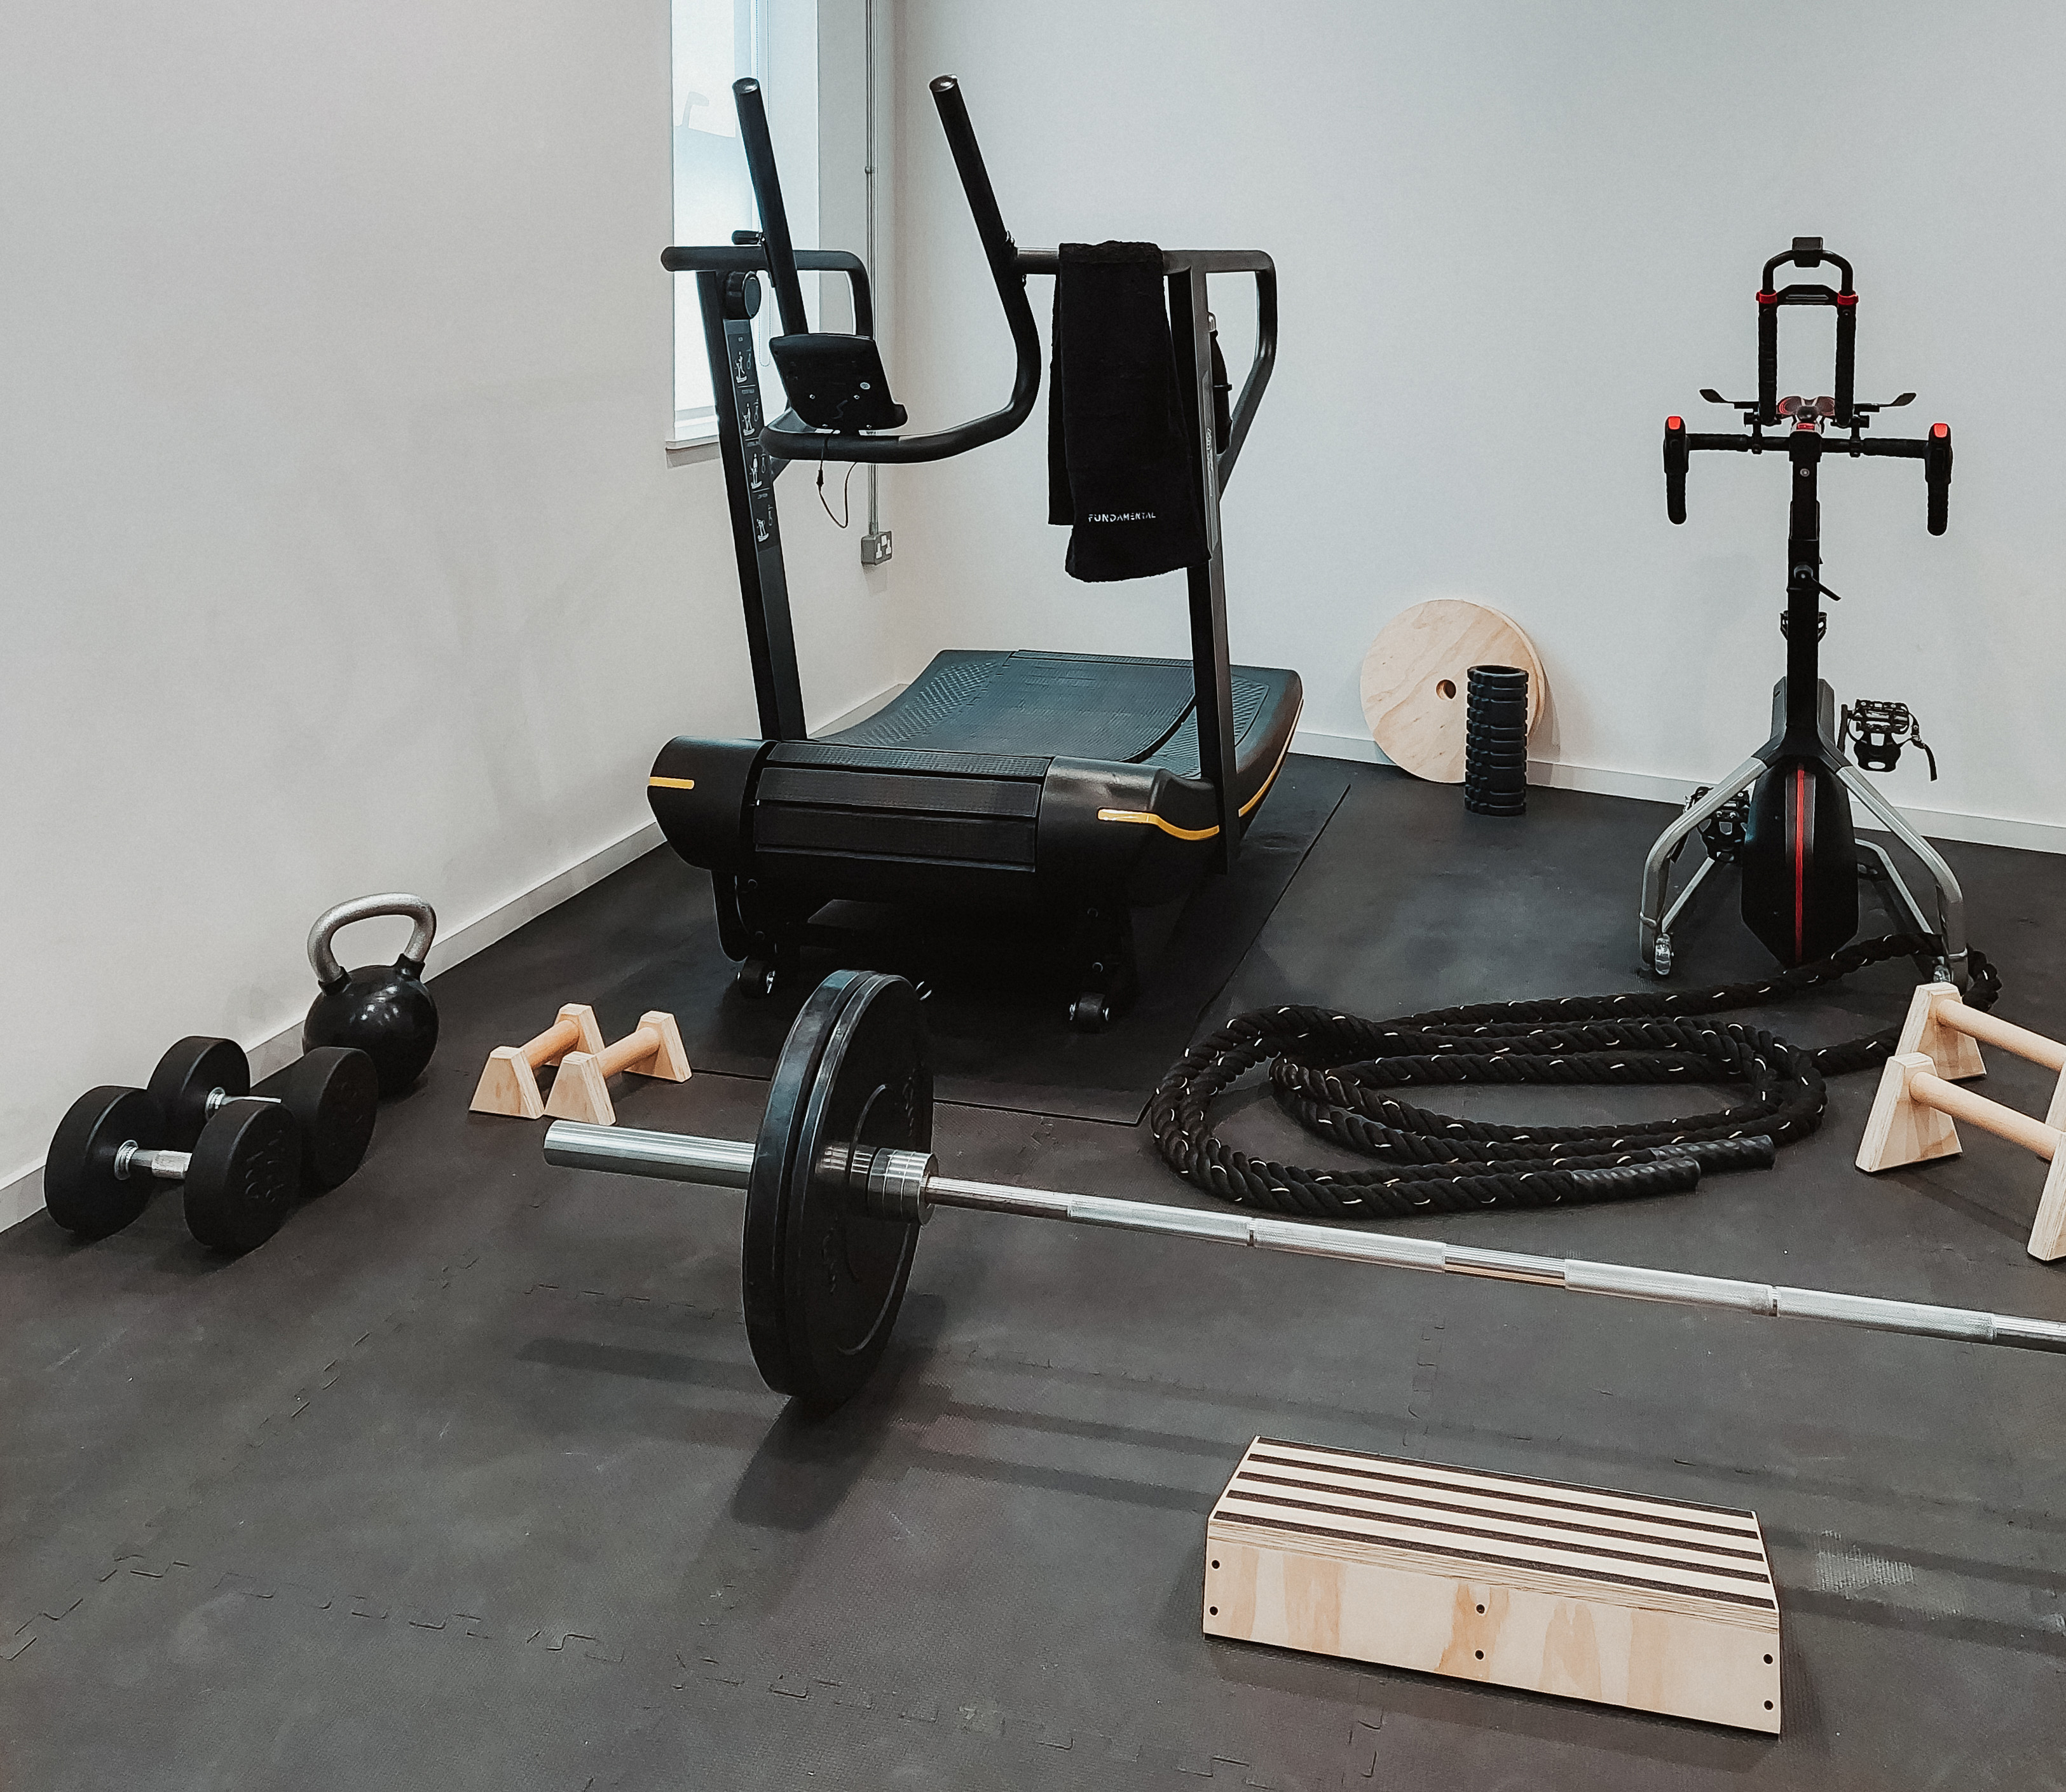 Fundamental Fitness handmade equipment for strength training, mobility and movement 